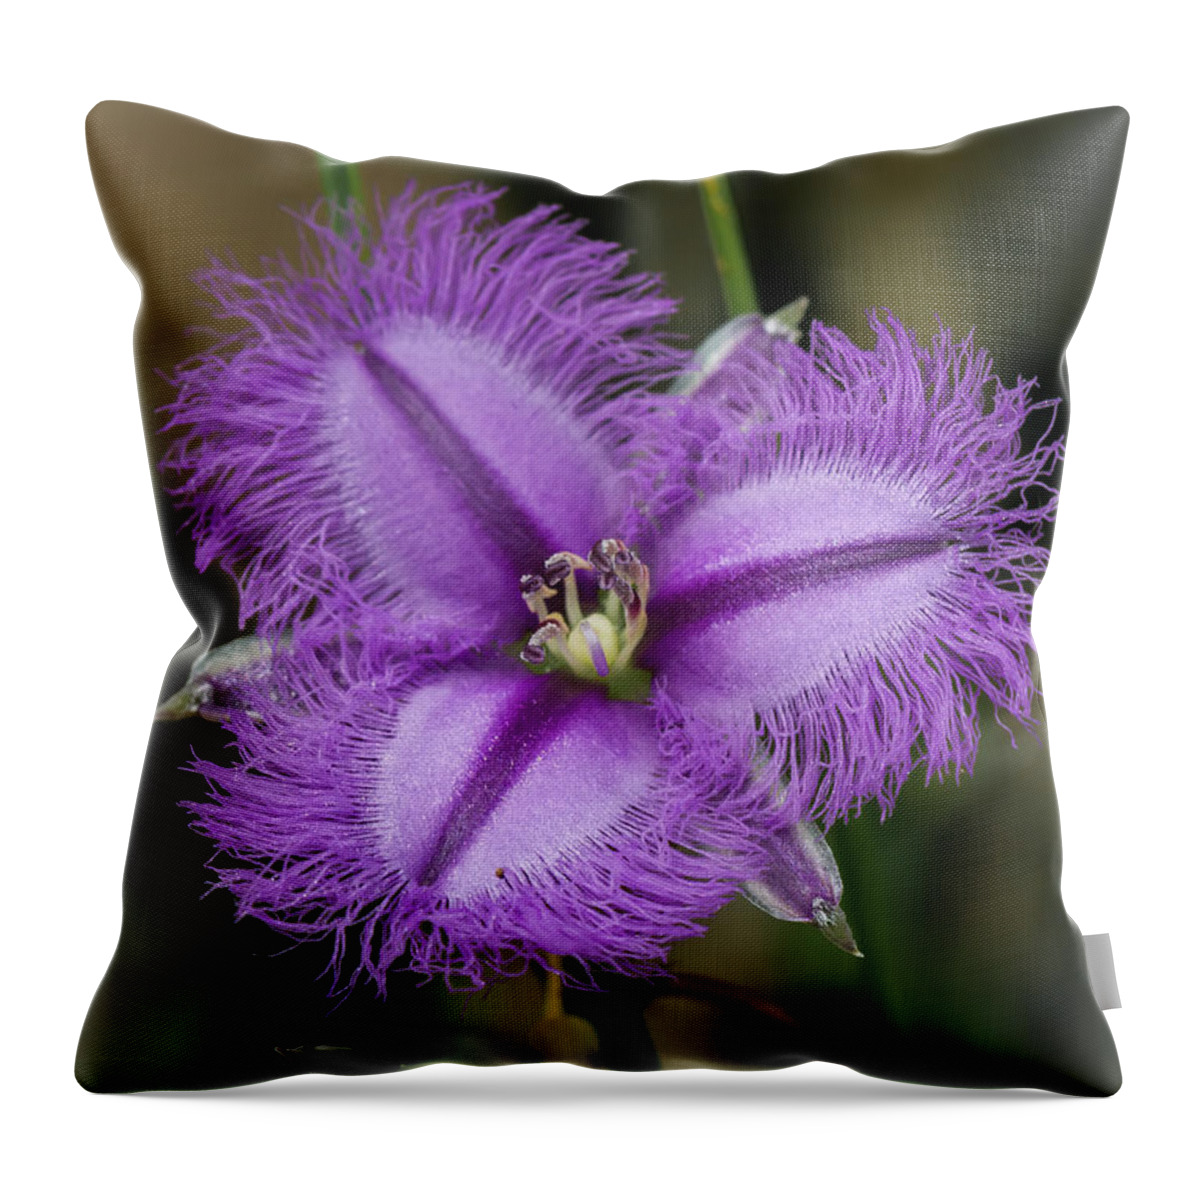 Fringe Lily Throw Pillow featuring the photograph Fringe Lily - Thysanotus tuberosus by Elaine Teague